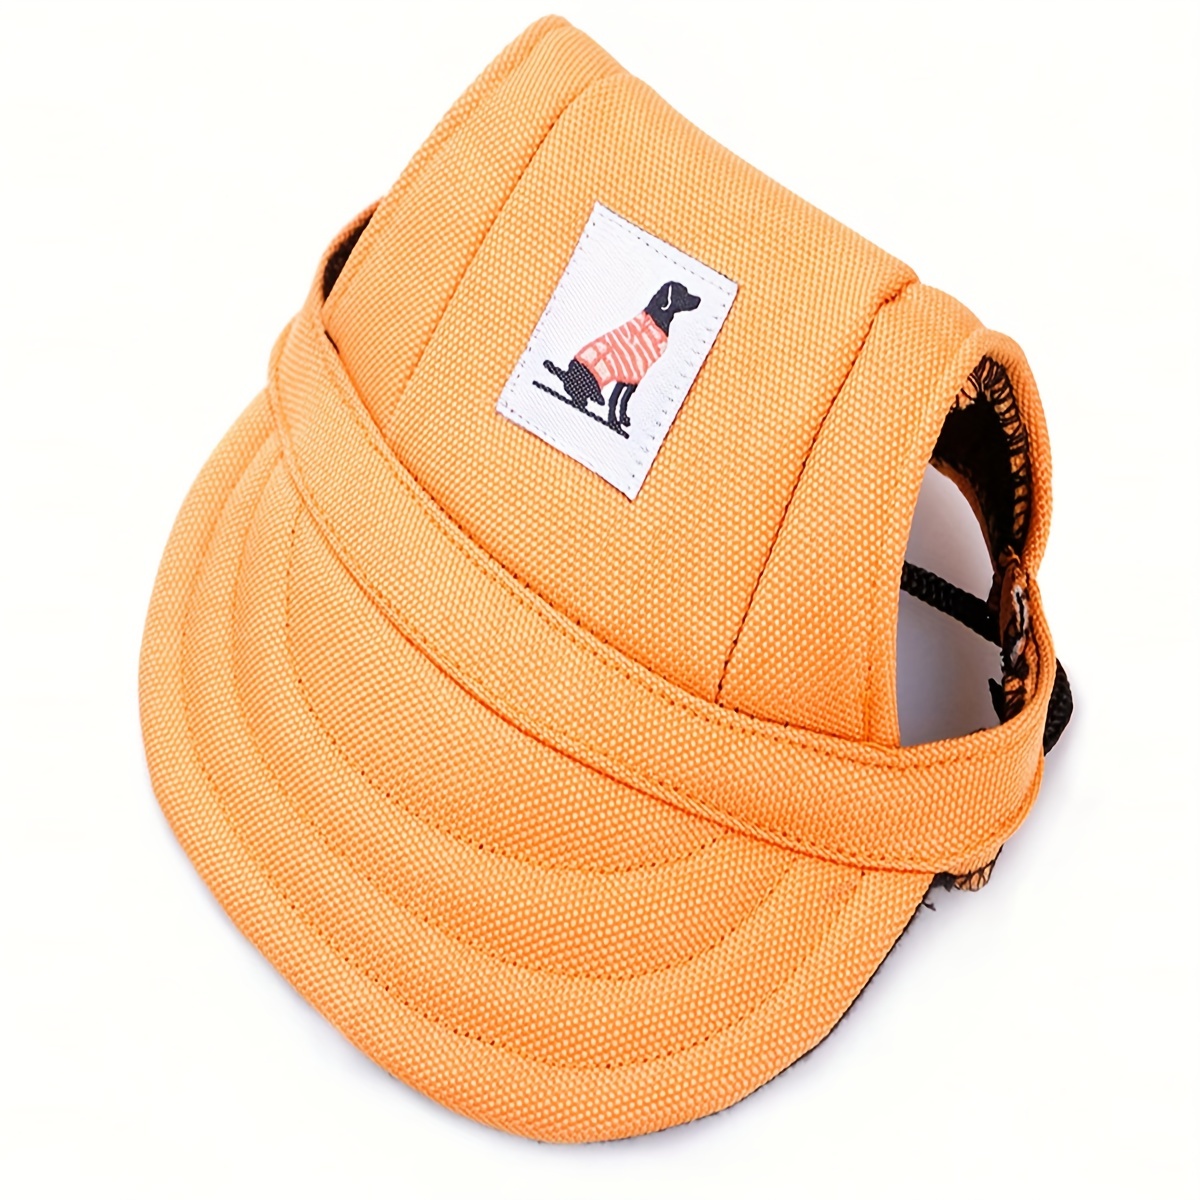 Pet Dog Hat Lovely Small Dog Cat Baseball Cap Canvas Visor Sun Protective  Hat For Summer With Ear Holes kitte Puppy Pet Supplies